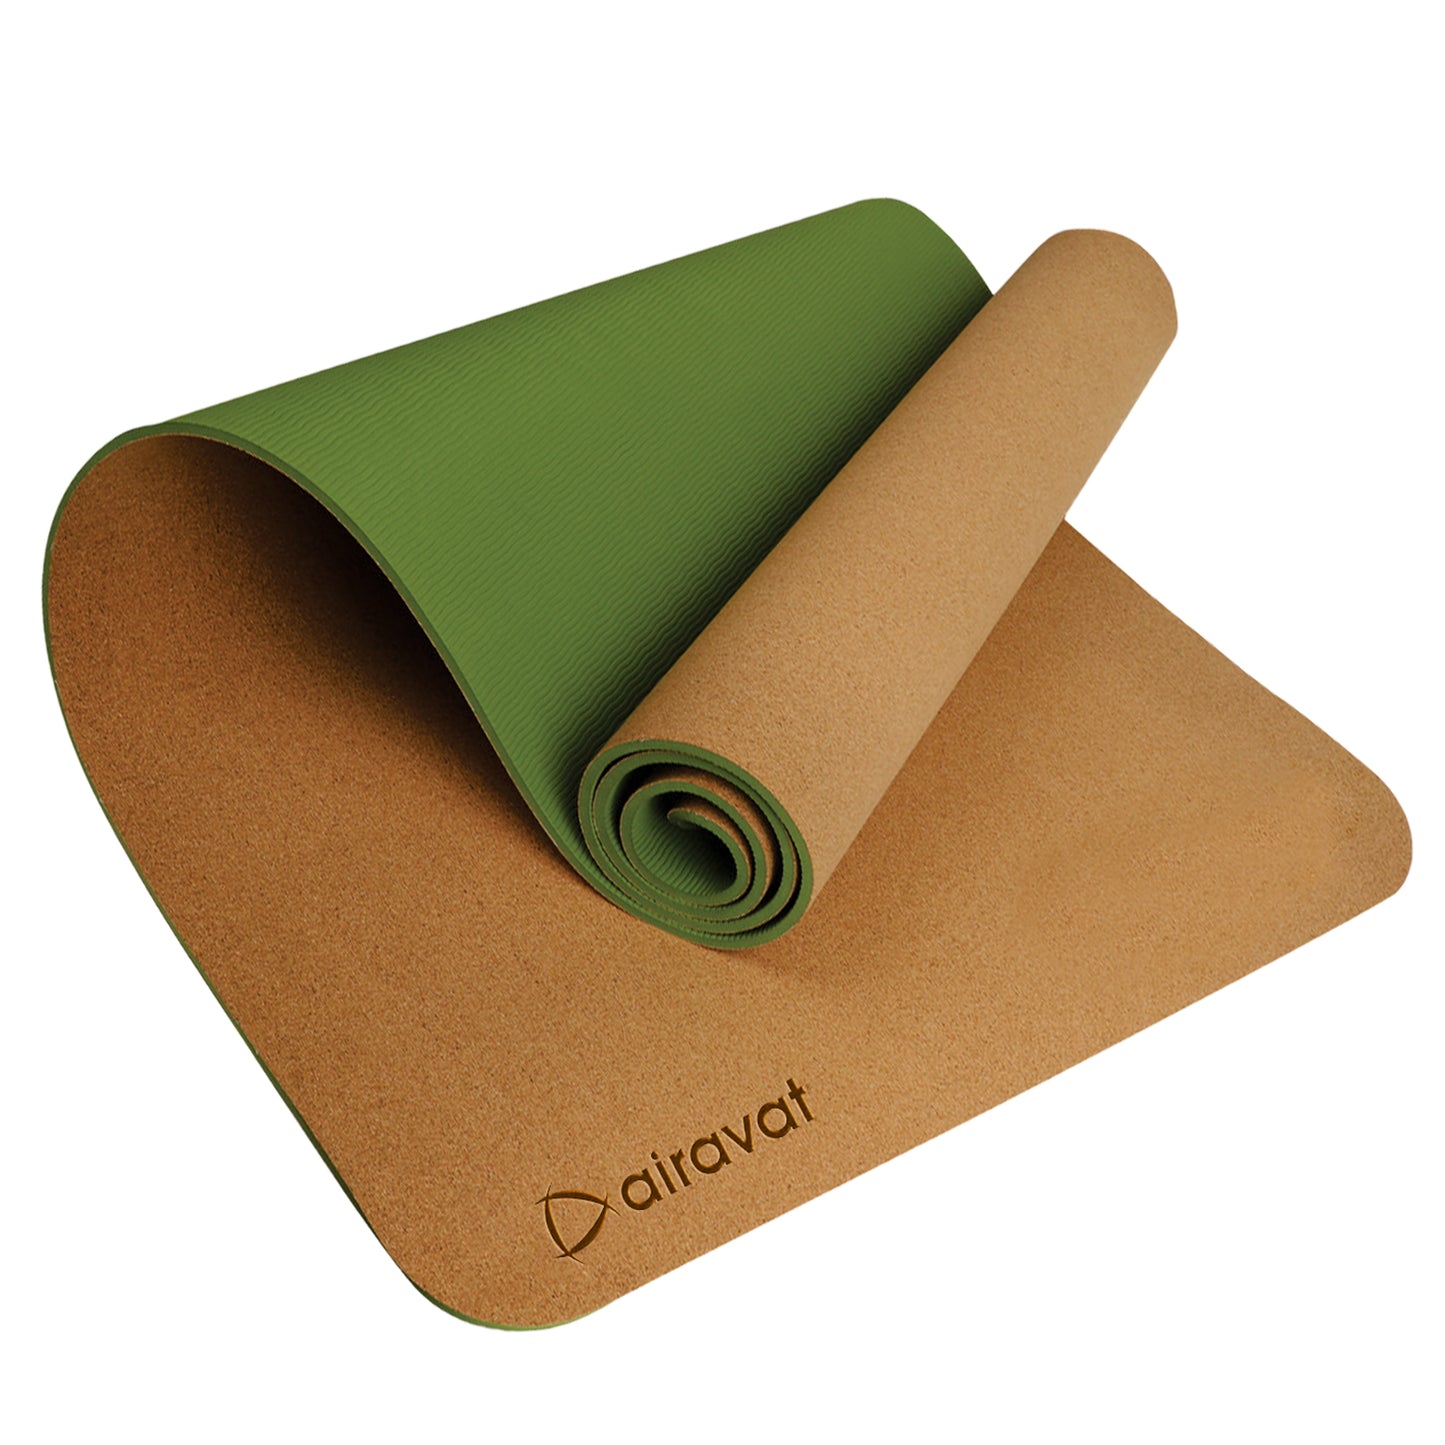 Corkyogis The Total Package: Cork Yoga Mat, Bag, Block And Bottle